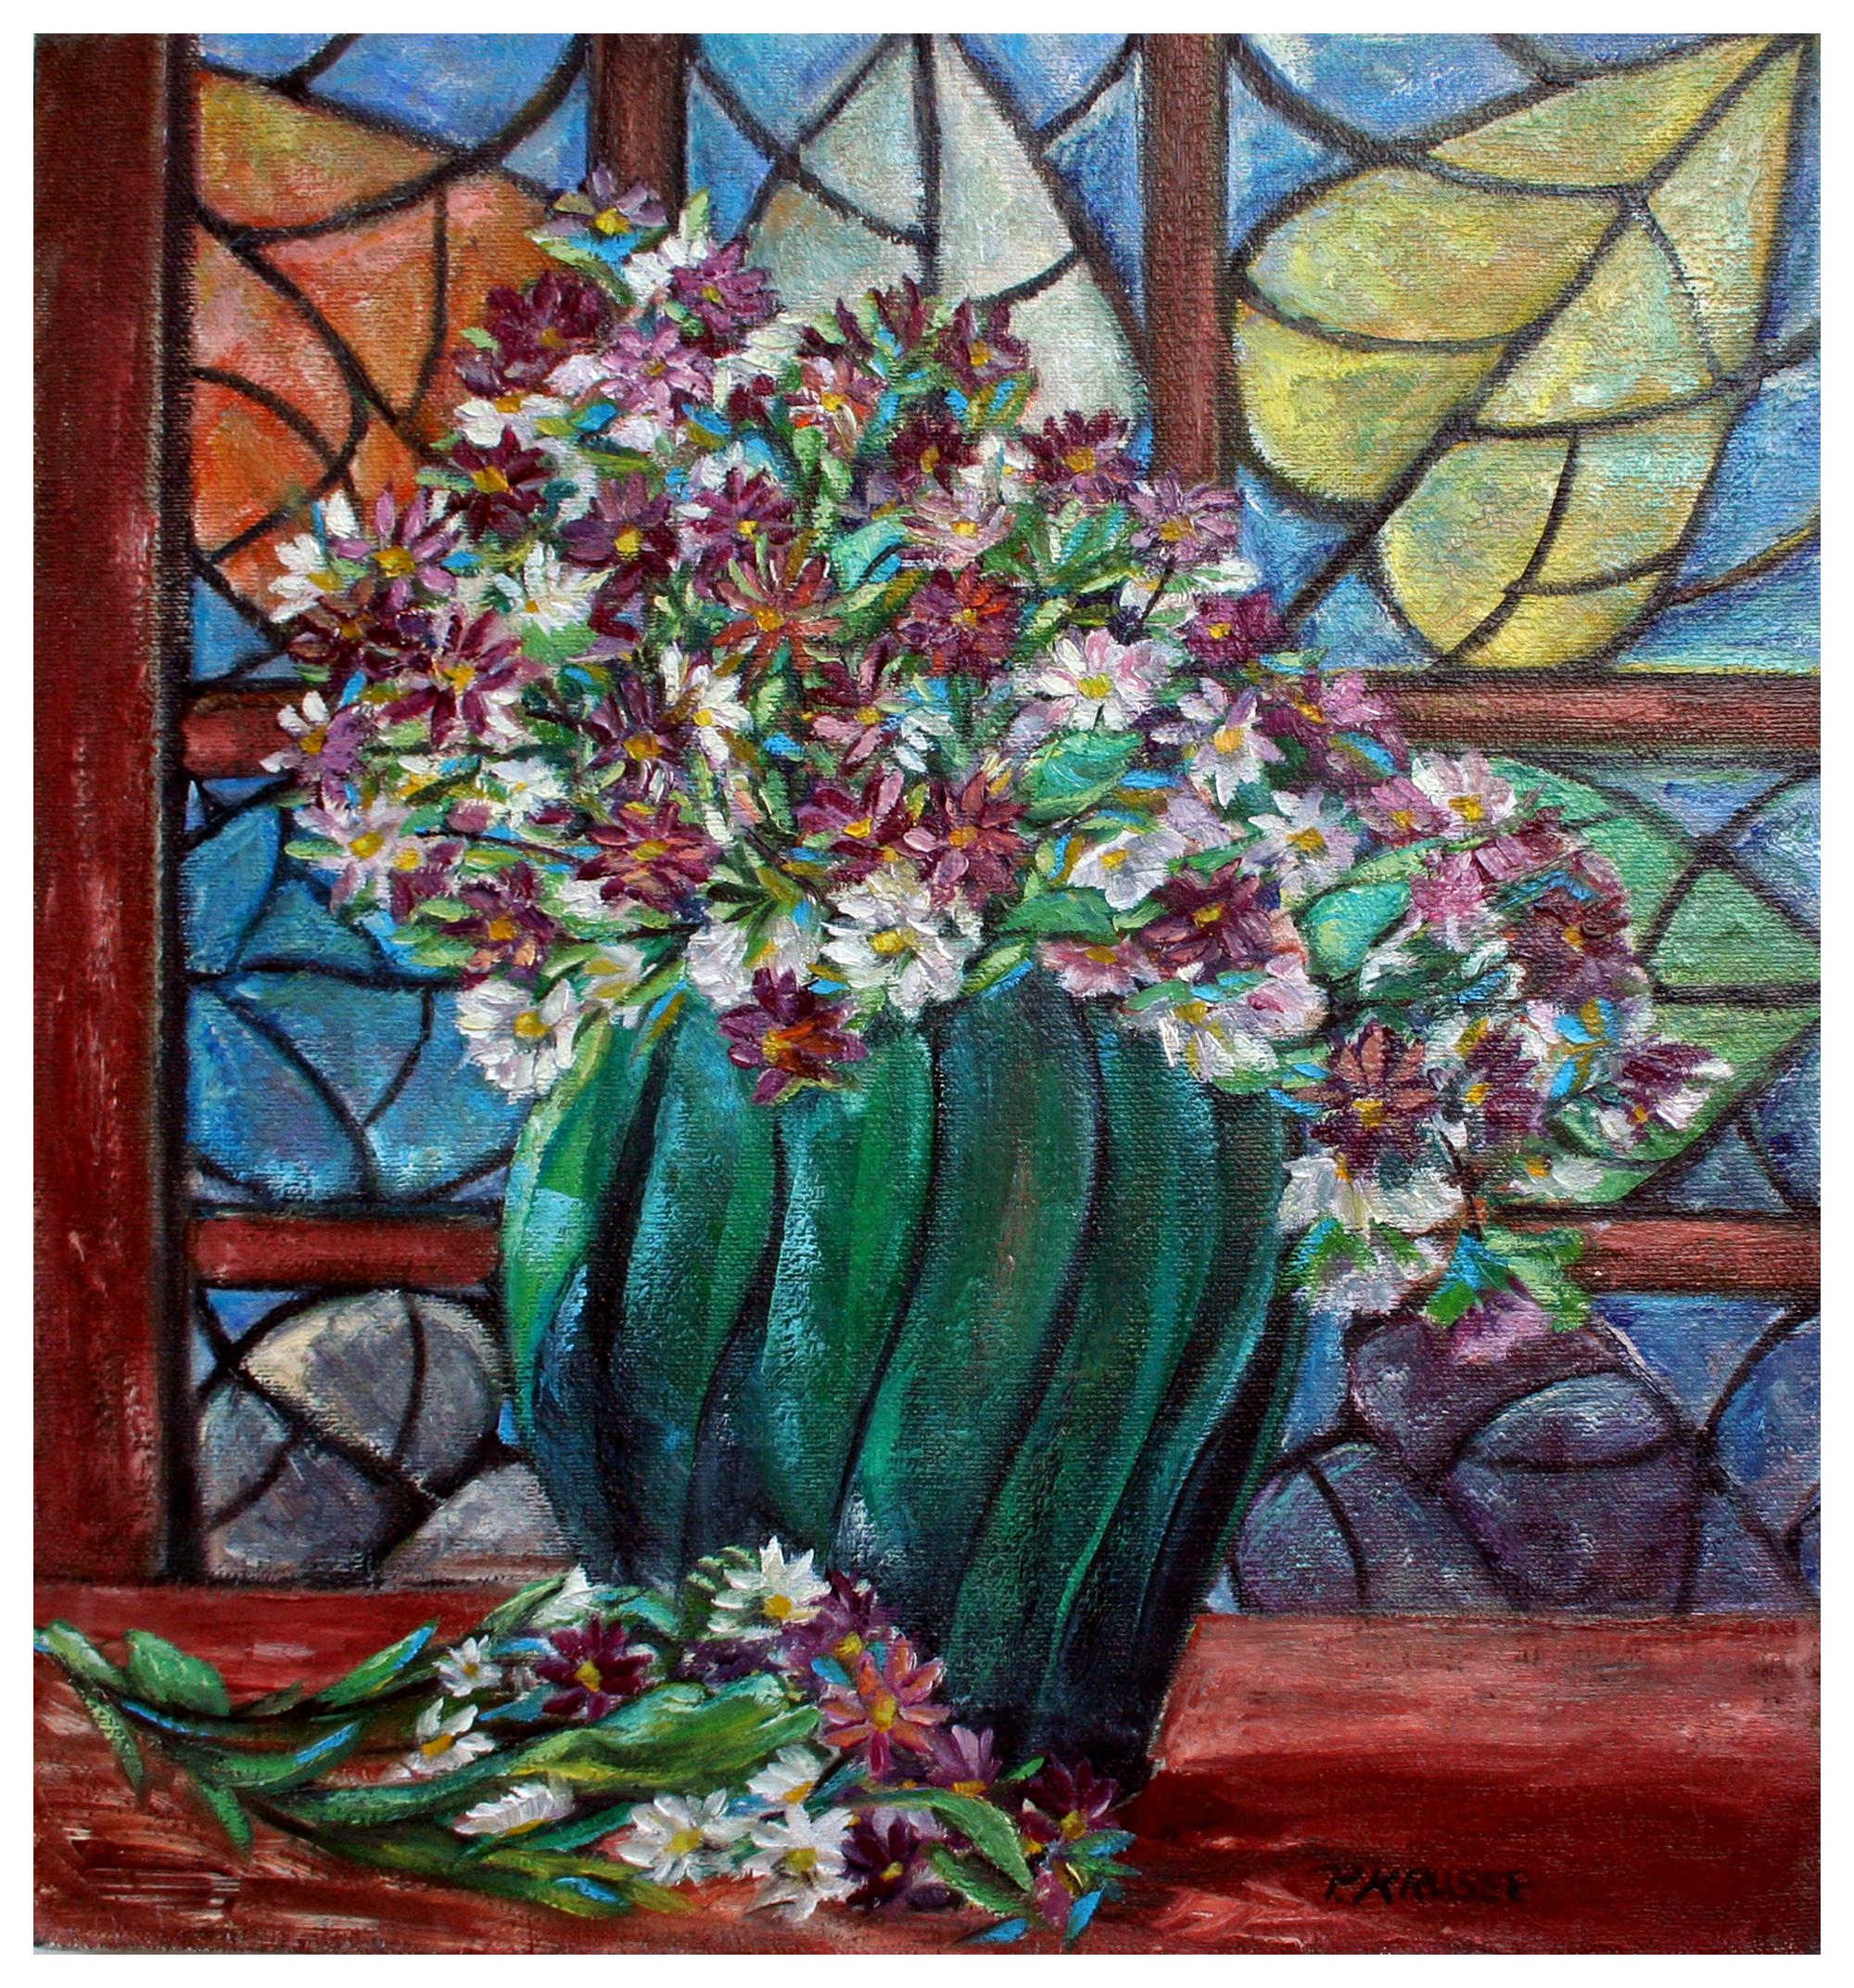 Peggy Krusee Interior Painting - Arts & Crafts Style Floral Still Life wit Stained Glass Window